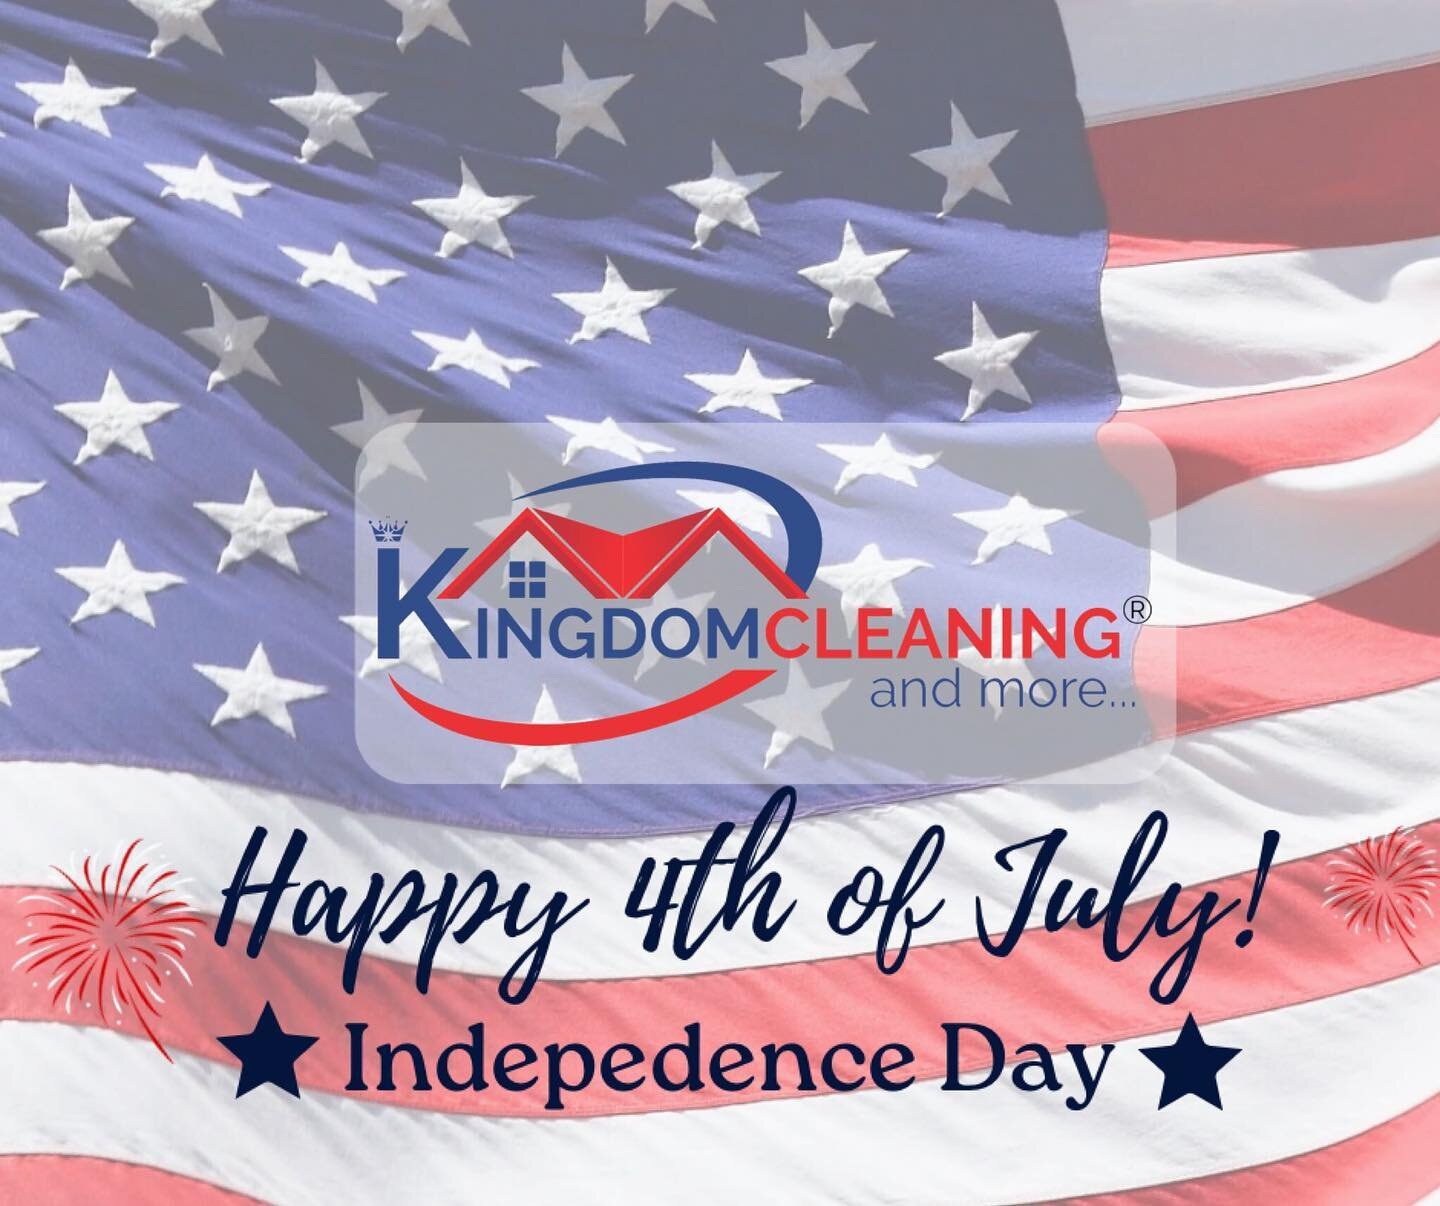 Wishing a very Happy July 4th to our clients. 🇺🇸🇺🇸🇺🇸Just like our nation is progressing, we wish our relationship with our clients also progress the same way 🇺🇸🇺🇸🇺🇸